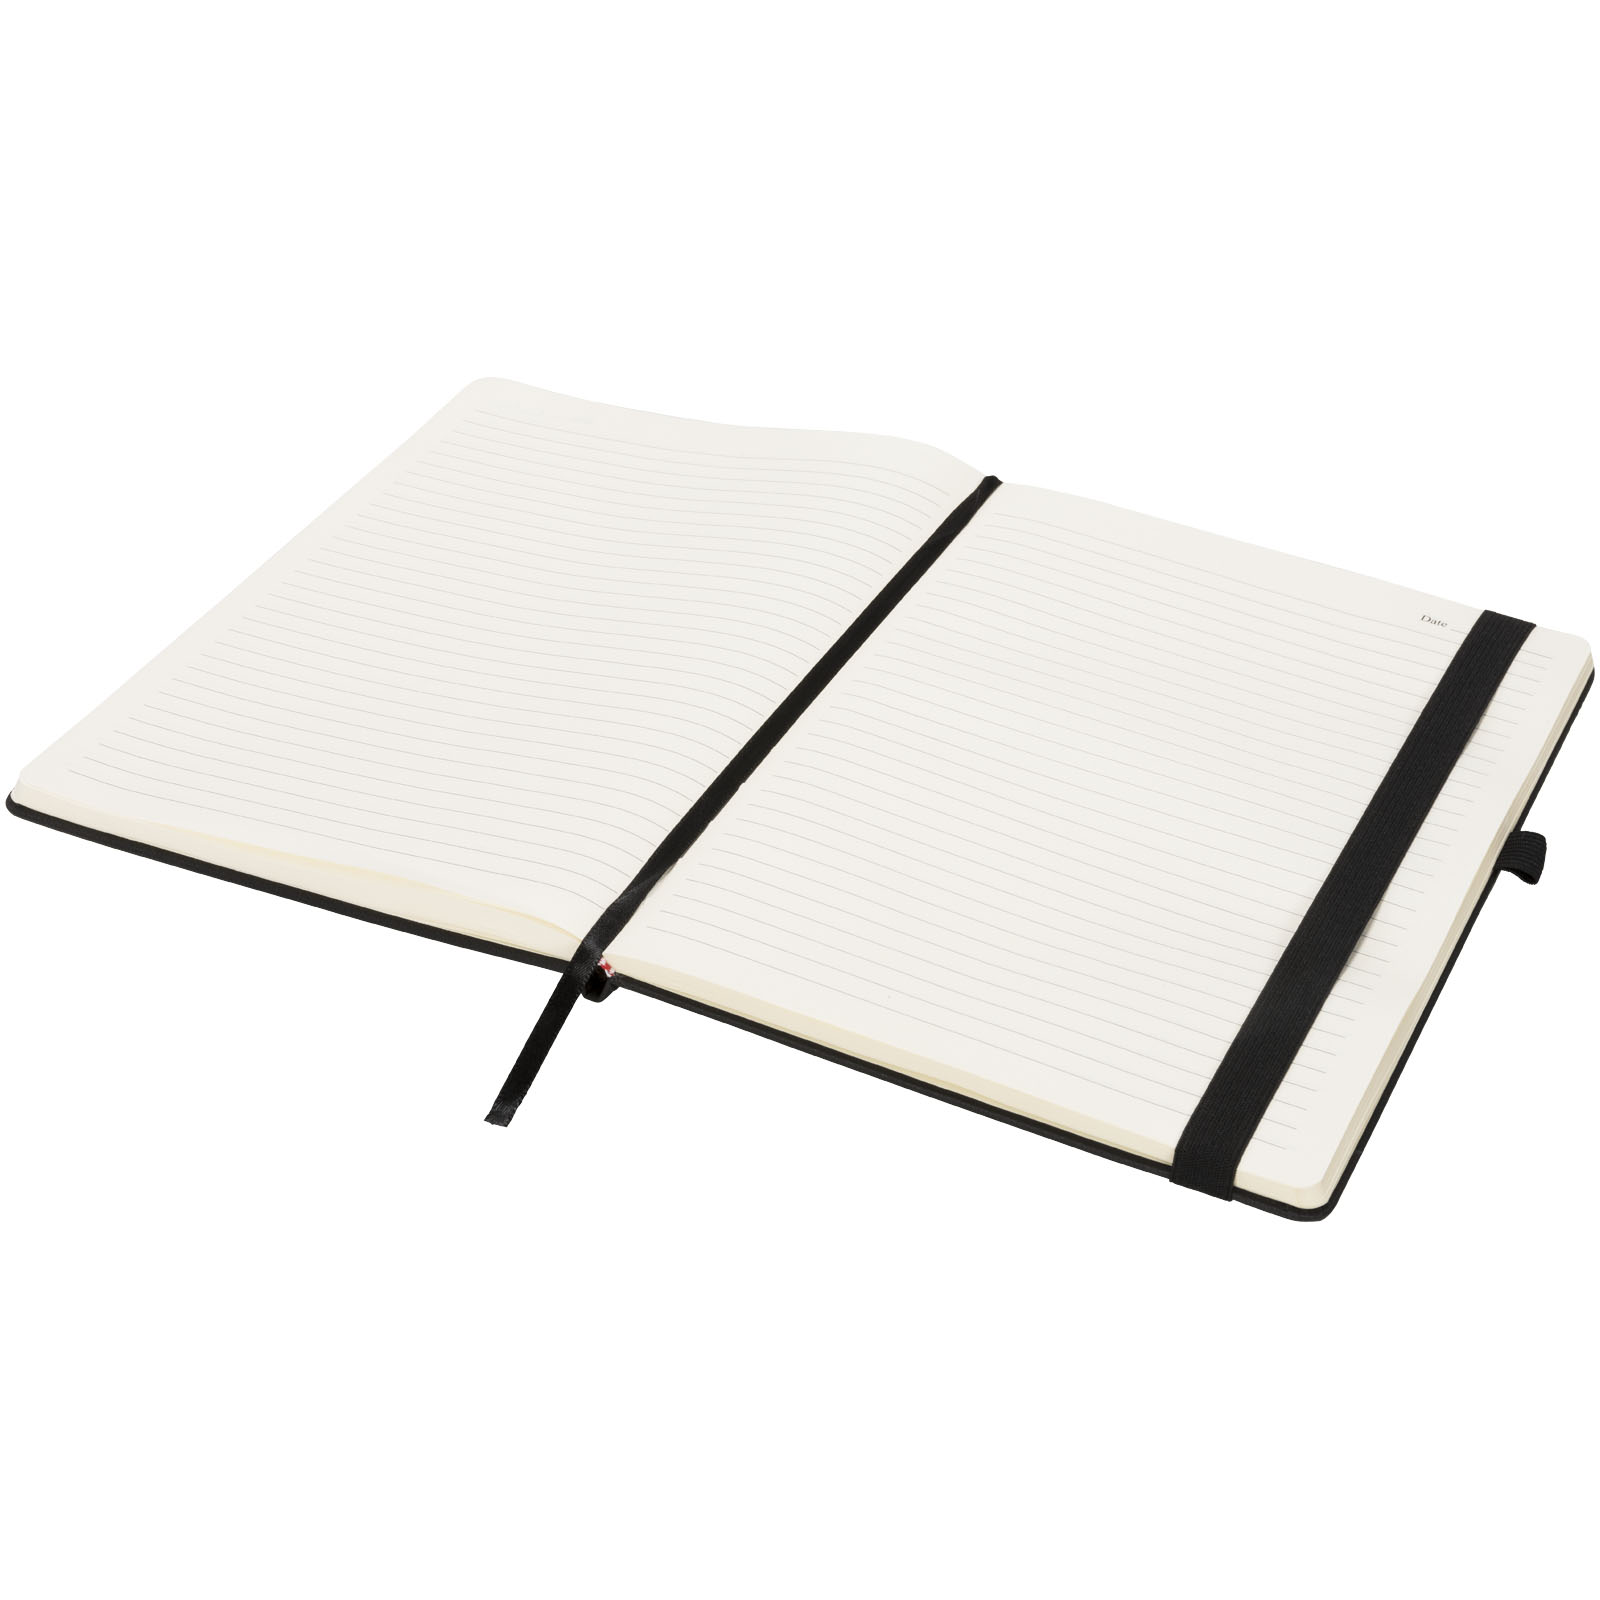 Advertising Hard cover notebooks - Rivista large notebook - 4